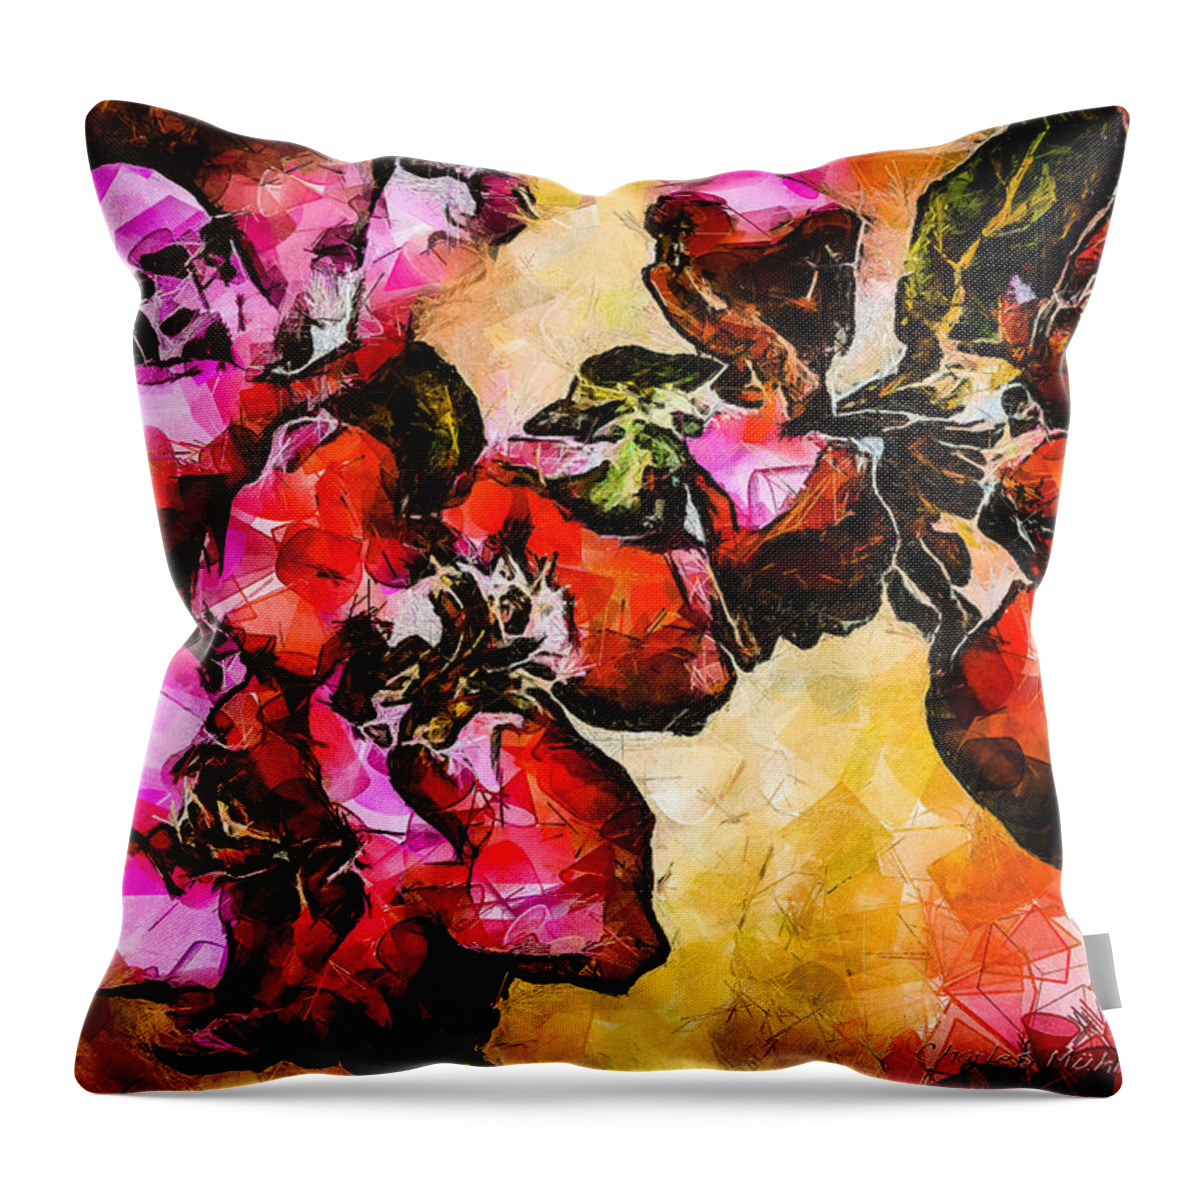 Magenta Throw Pillow featuring the digital art Magenta flowers -- Cubism by Charles Muhle